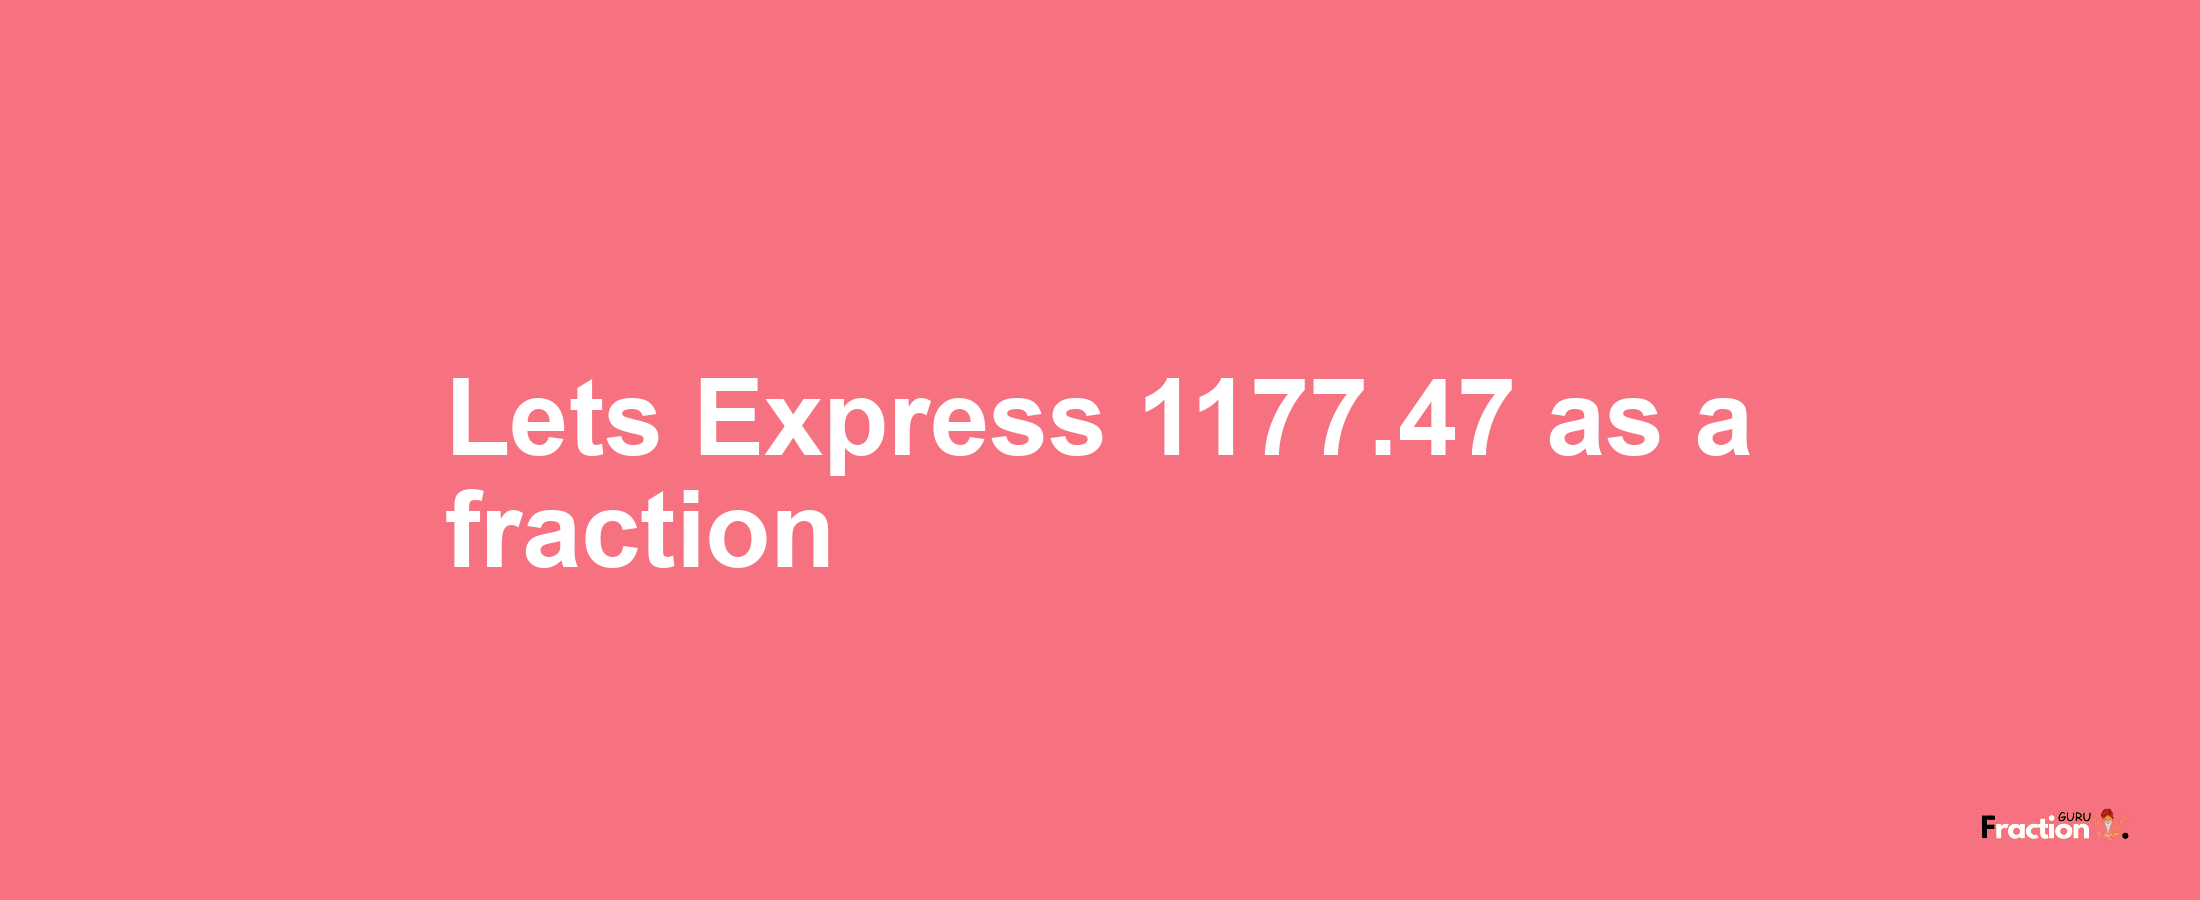 Lets Express 1177.47 as afraction